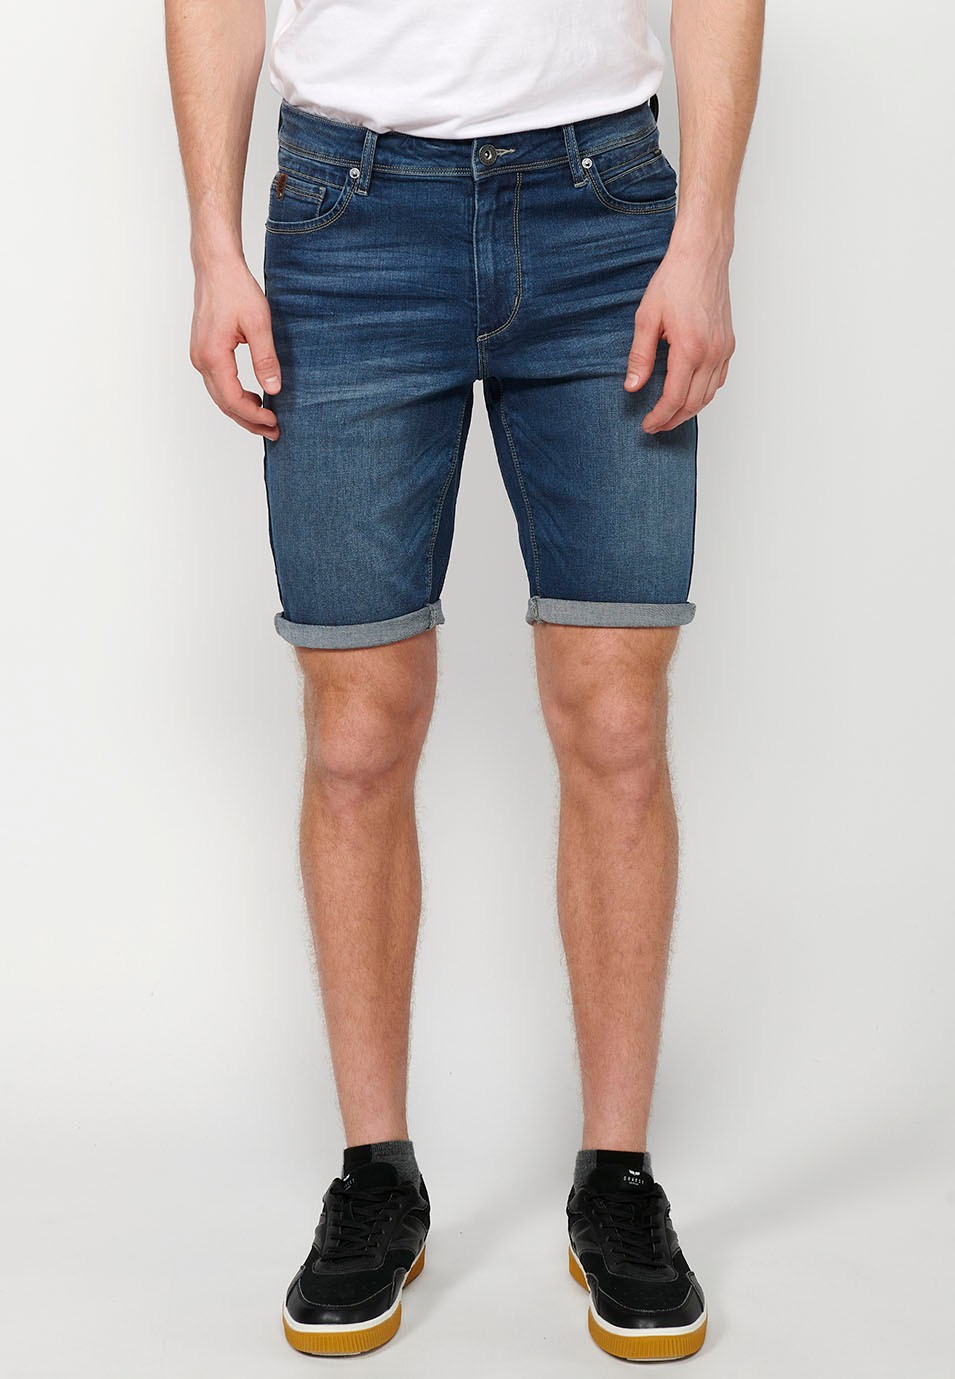 Blue Denim Bermuda Shorts with Turn-Up Finish and Front Zipper and Button Closure for Men 2